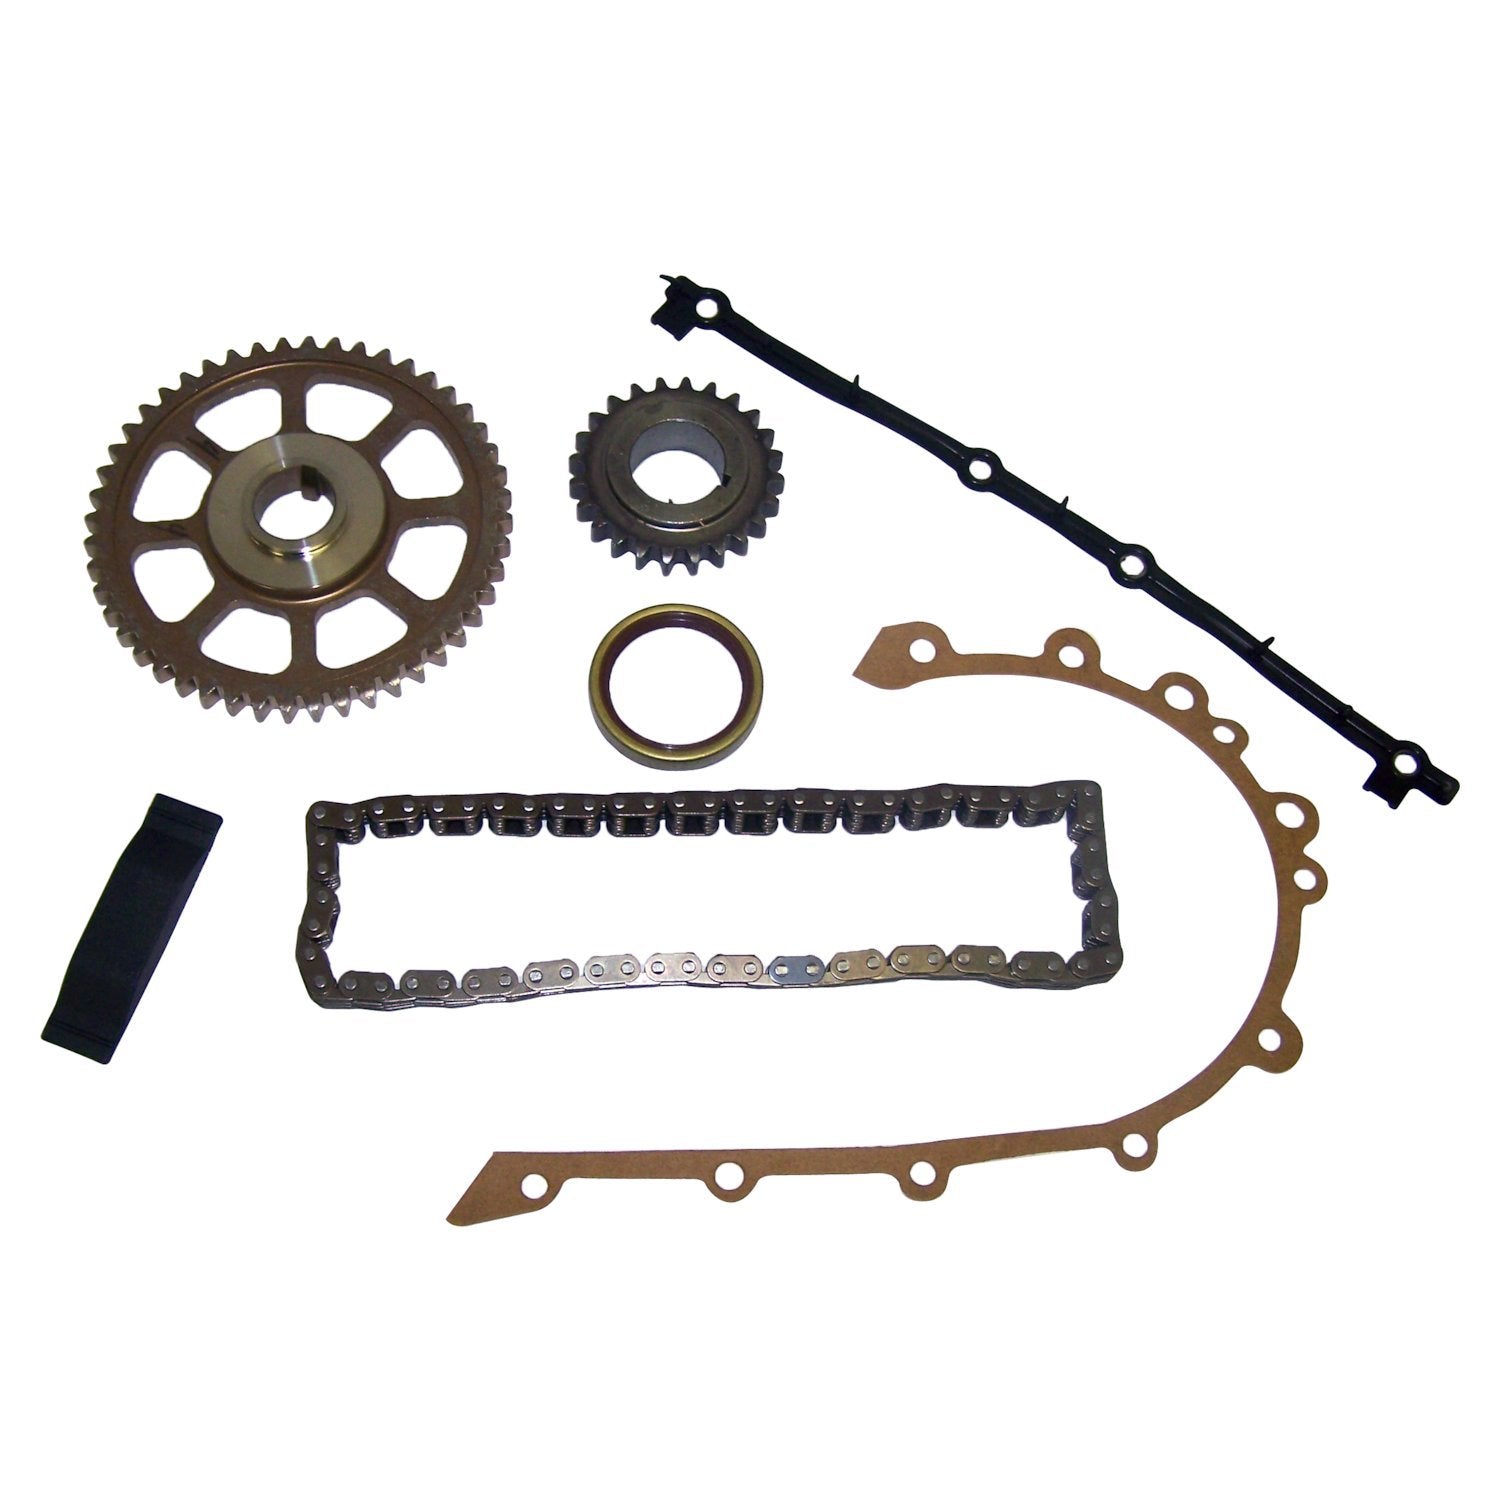 Timing Chain Kit, Includes 2 Sprockets, Chain, Guide and Gaskets